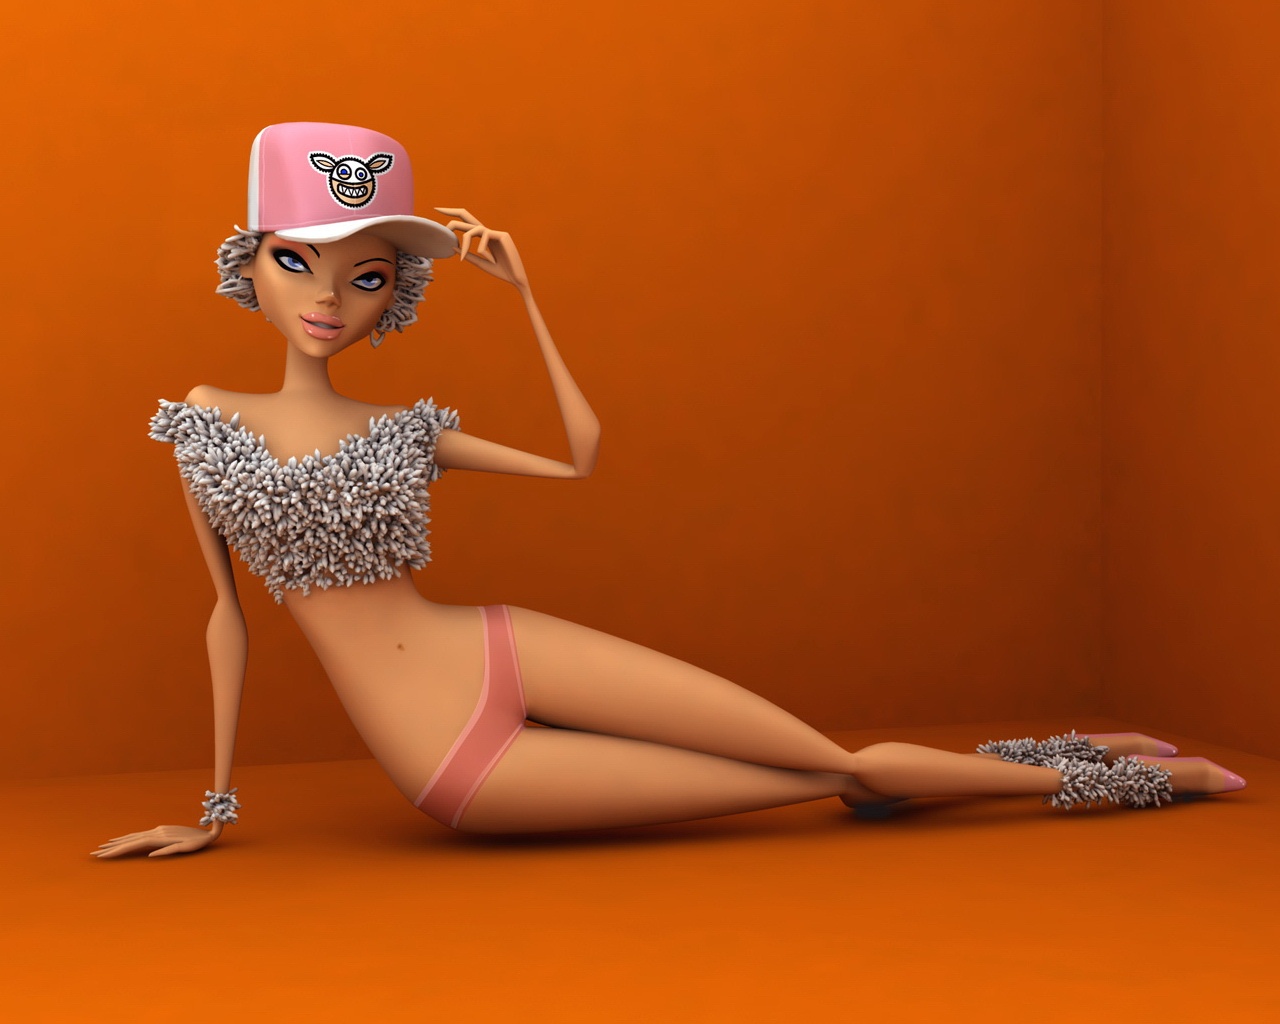 1280x1024 Stylish Barbie Doll wallpaper, music and dance wallpapers